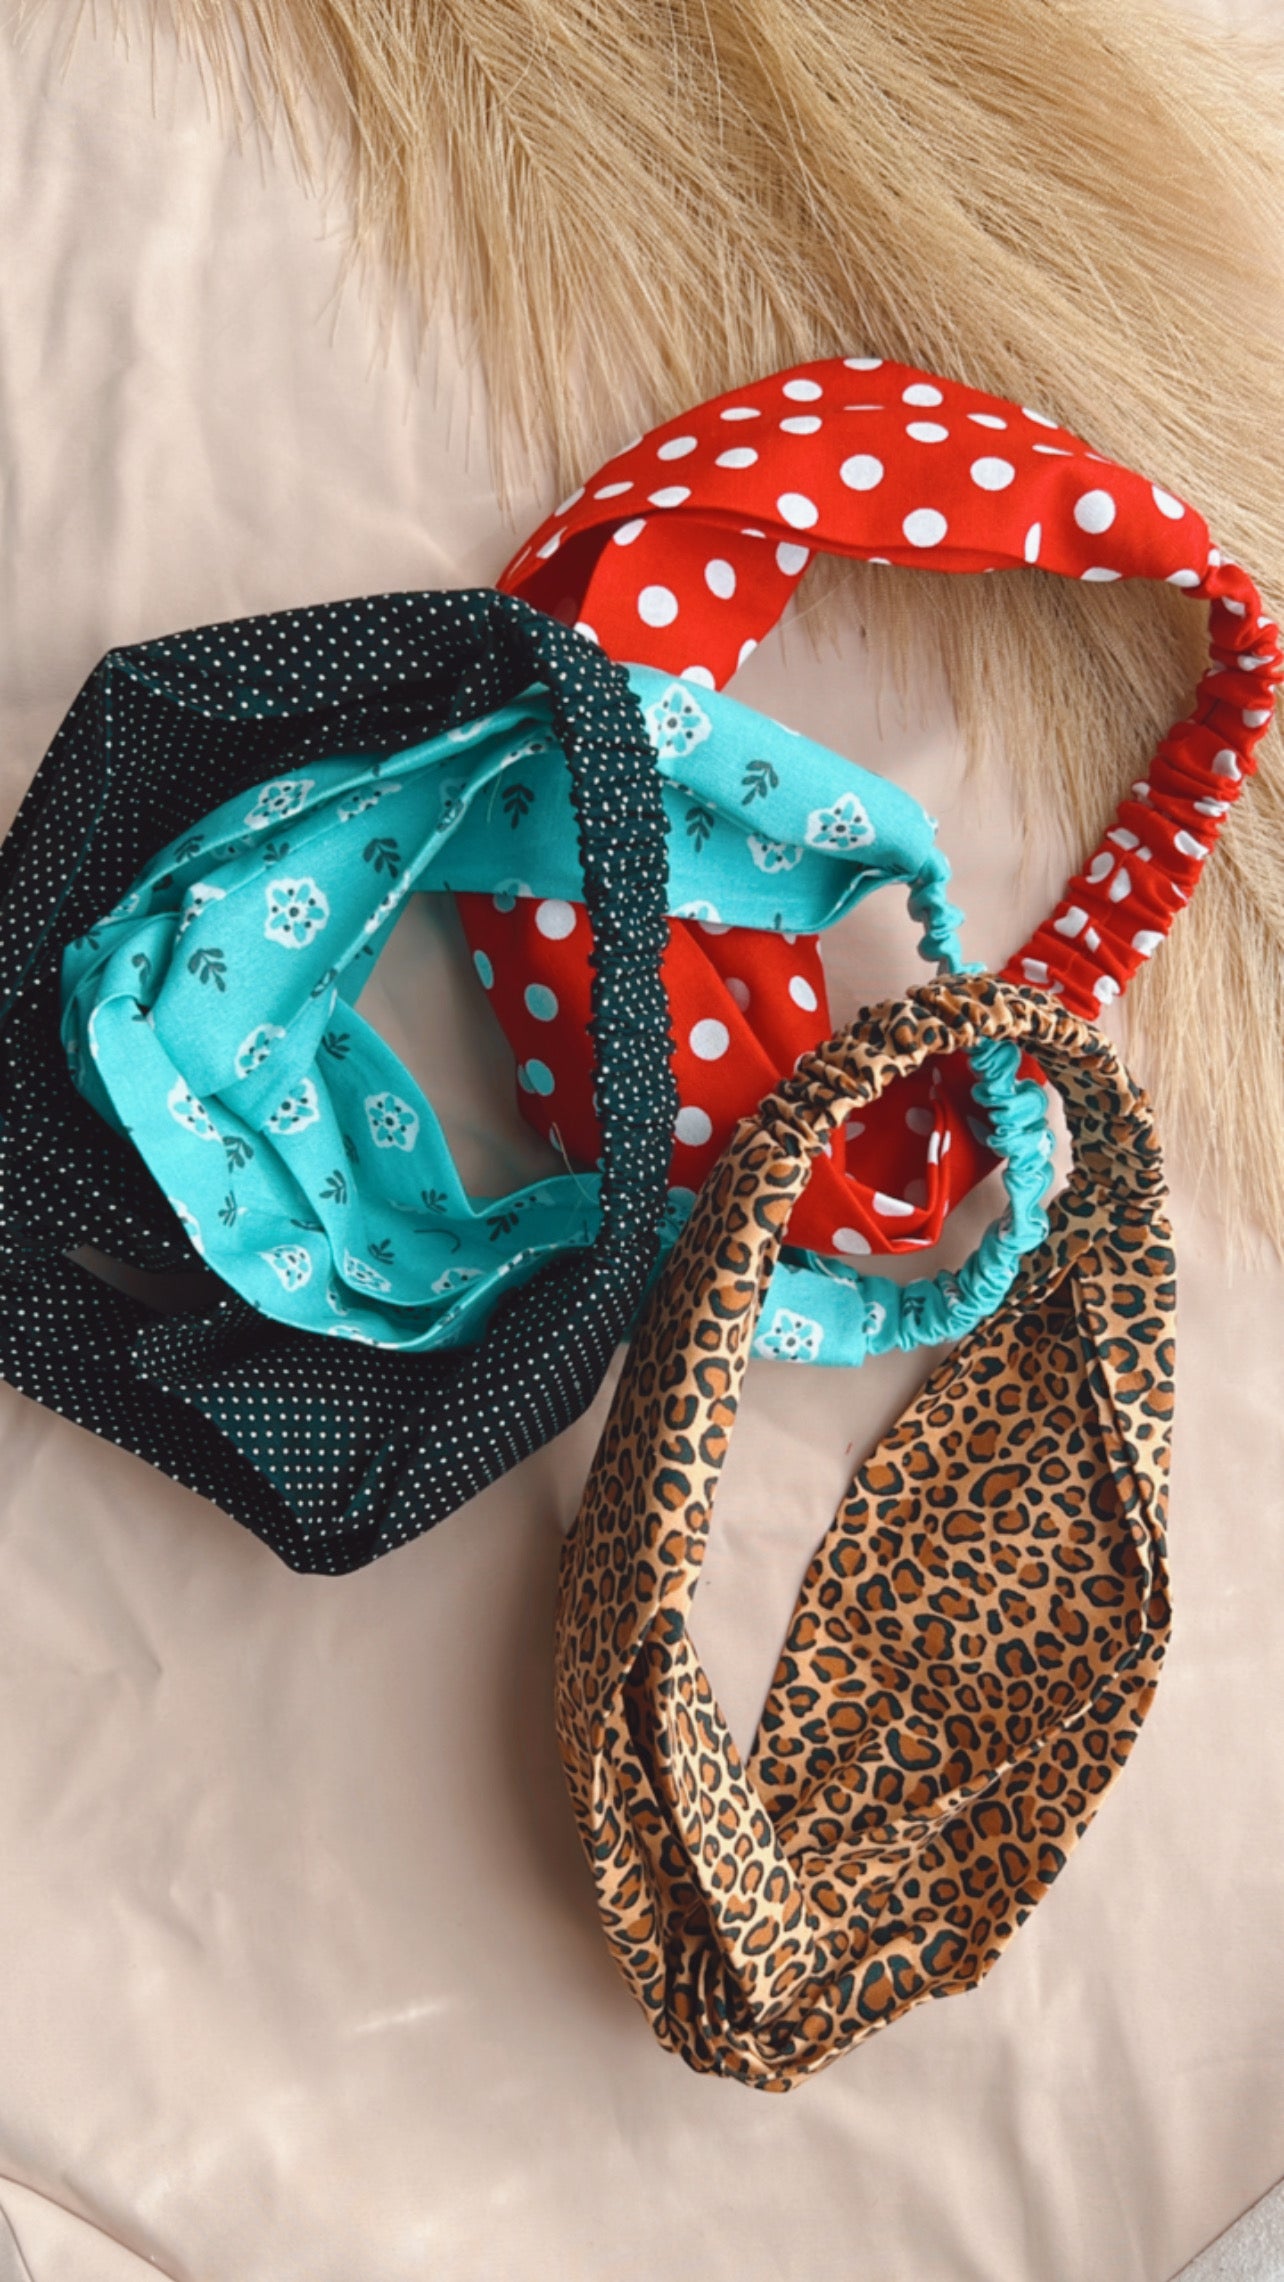 4 different colors cotton fabric headbands